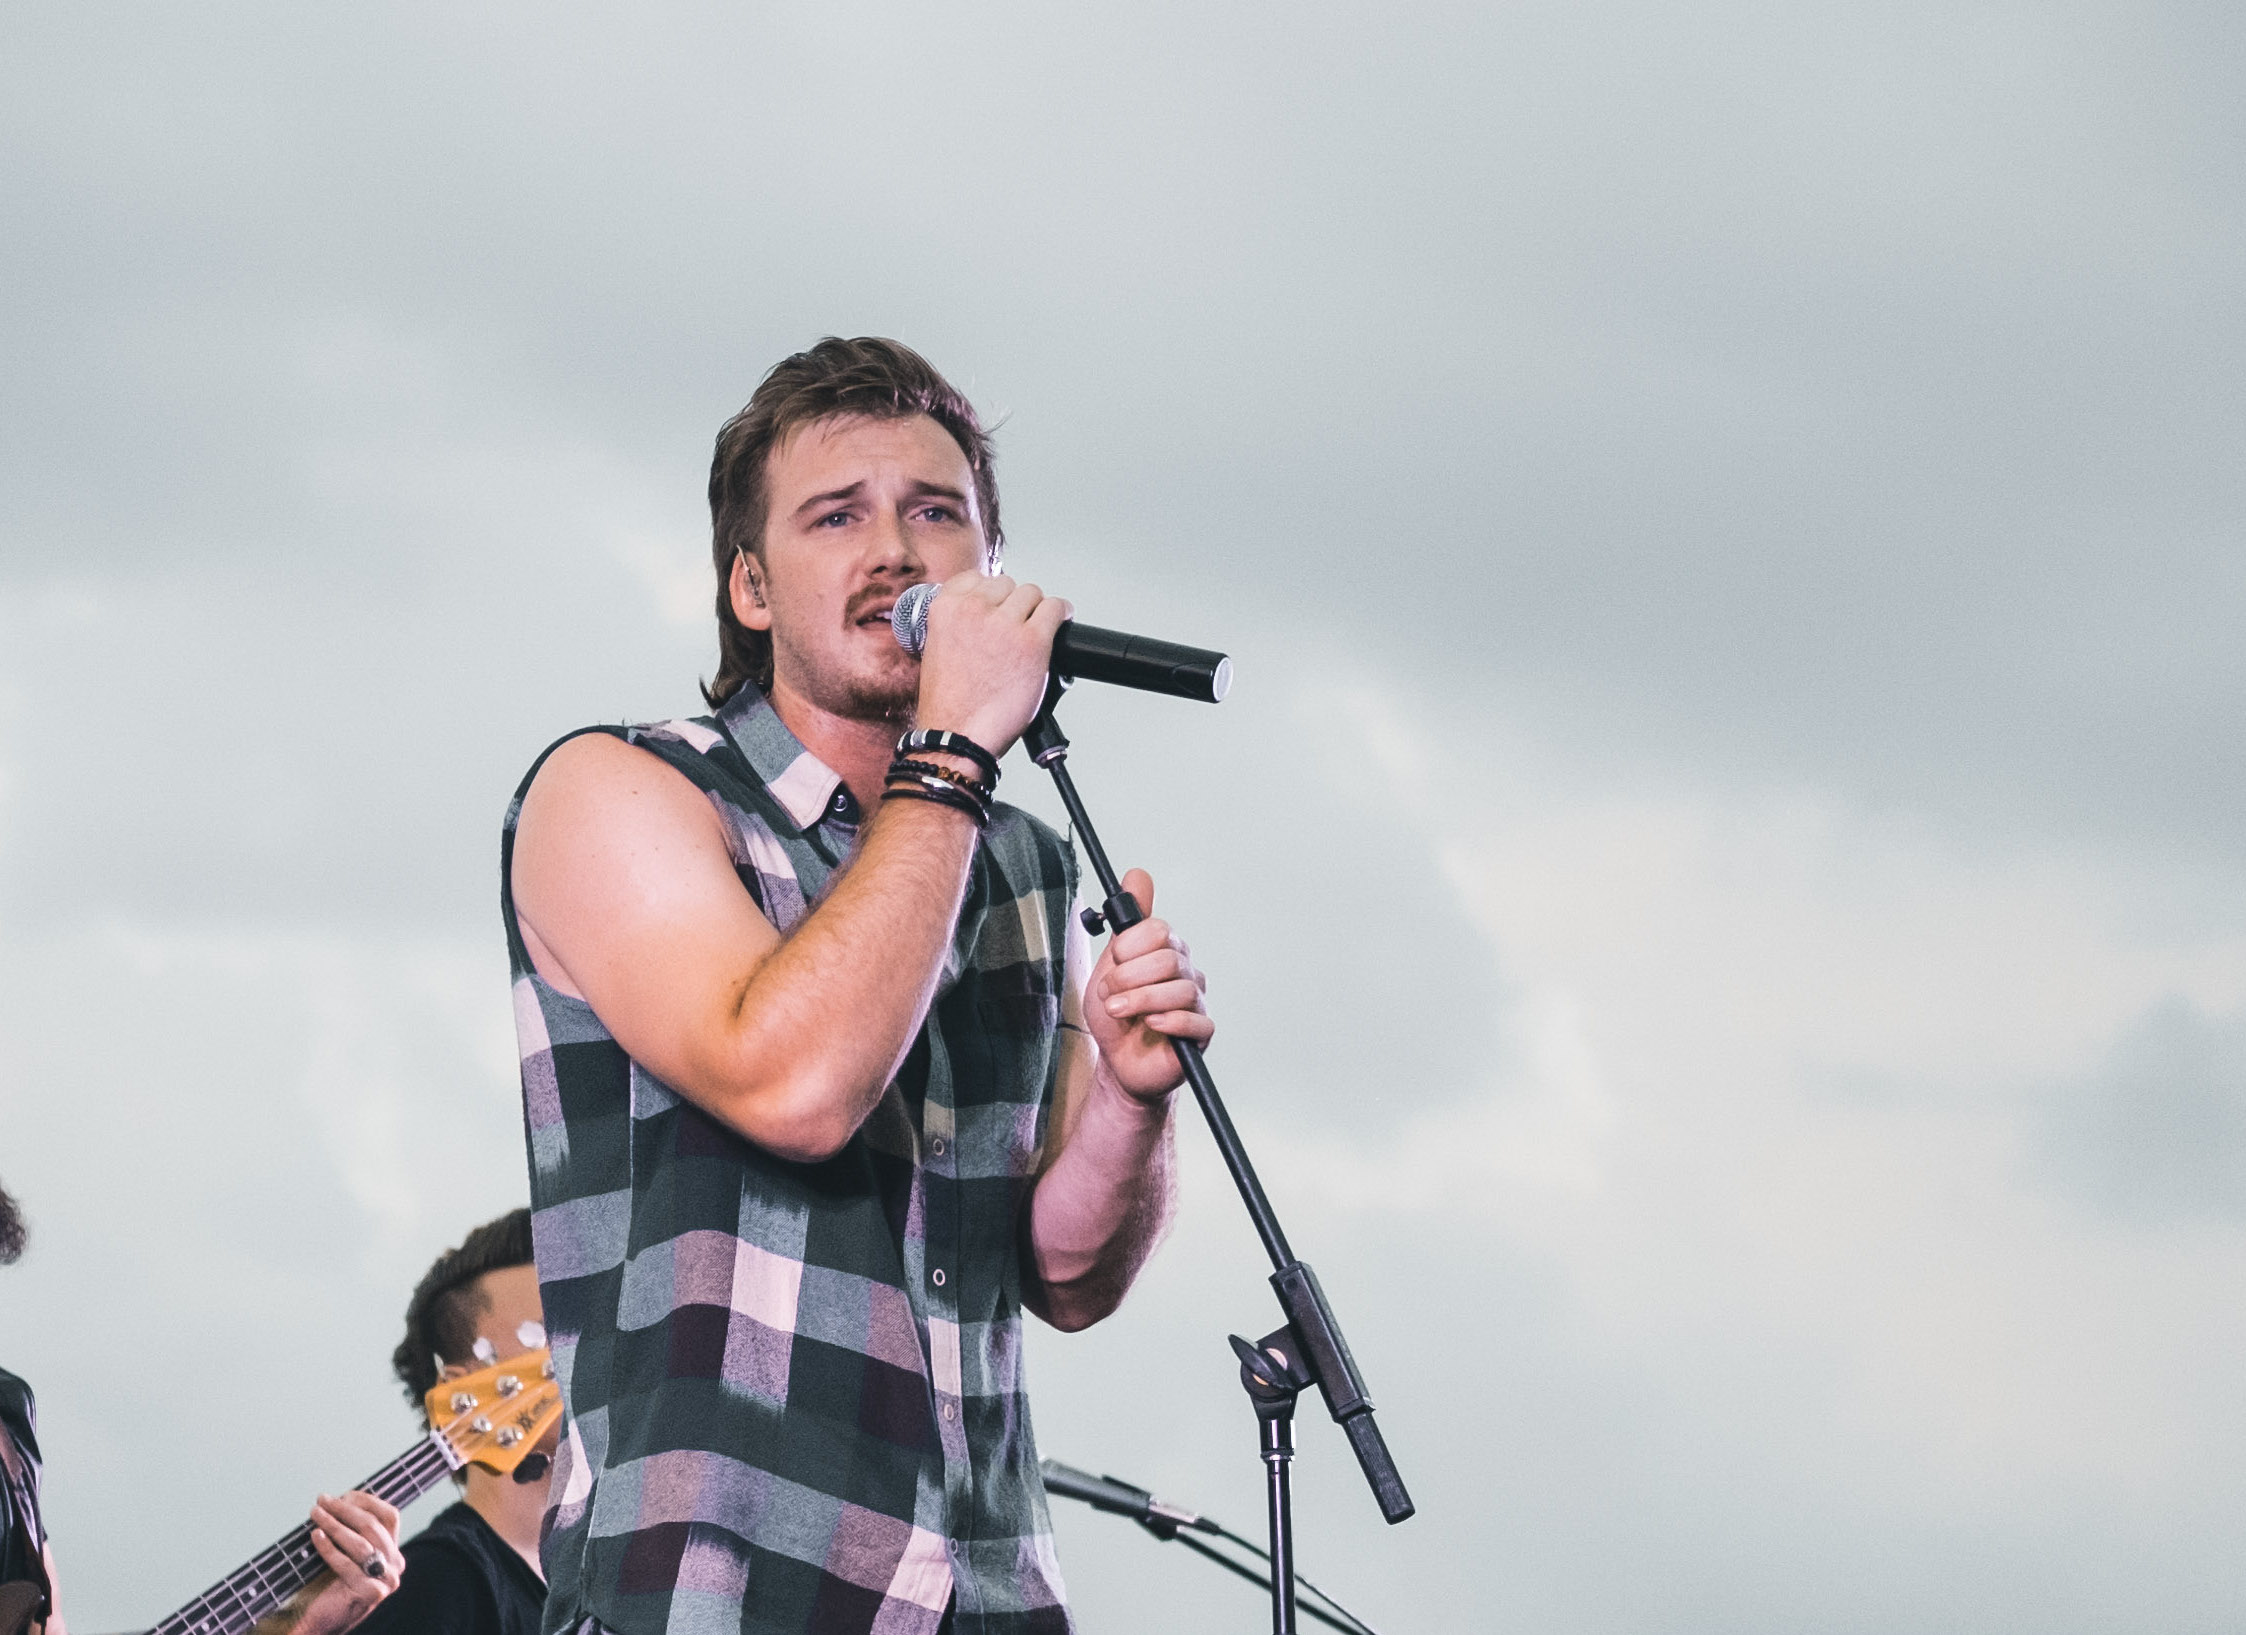 Country Star Morgan Wallen Sparks Online Fury After Last-Minute Concert Cancellation